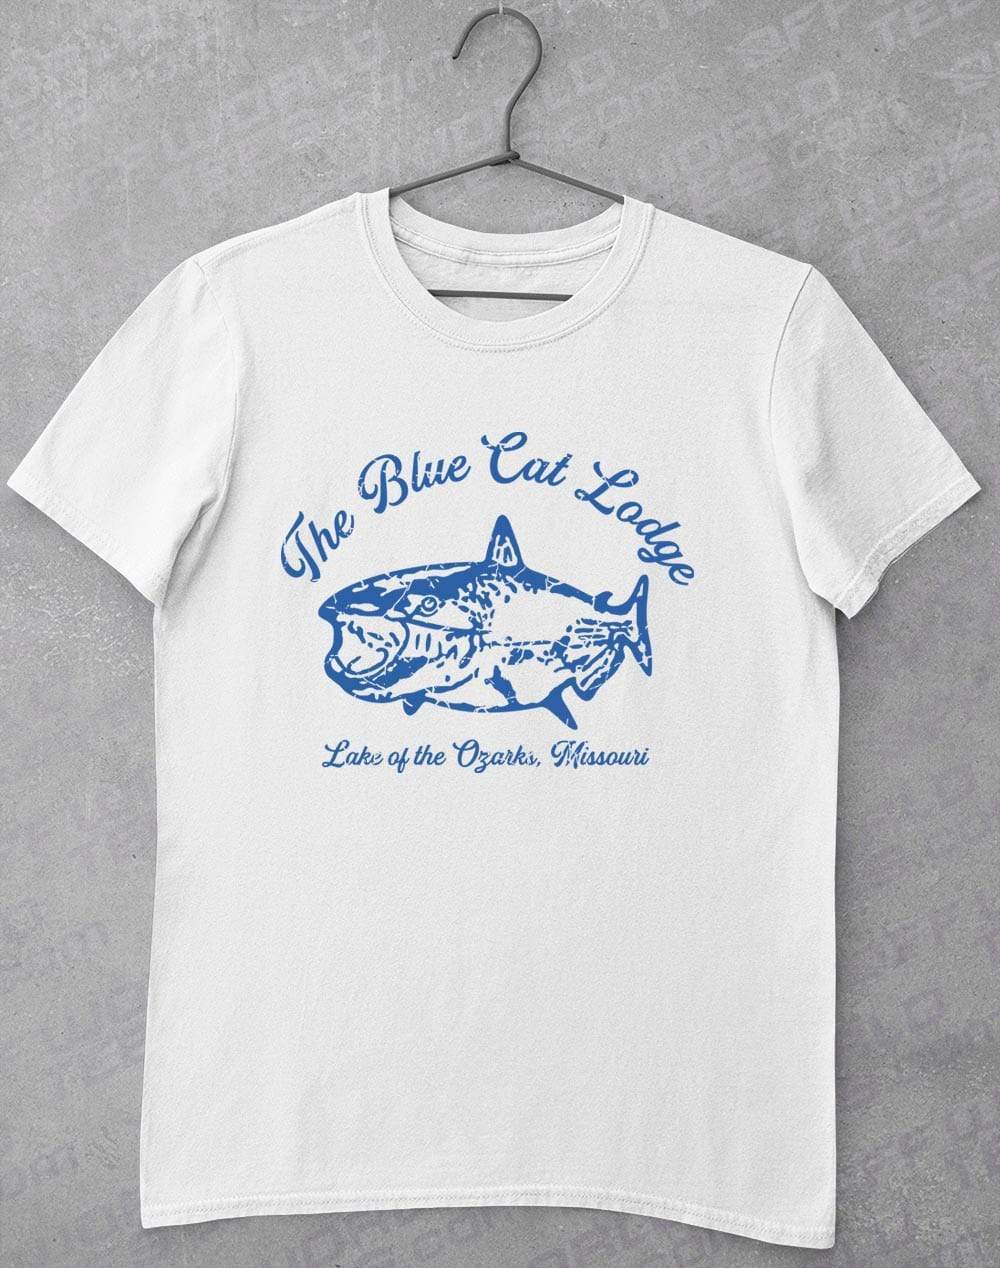 The Blue Cat Lodge T-Shirt S / White  - Off World Tees